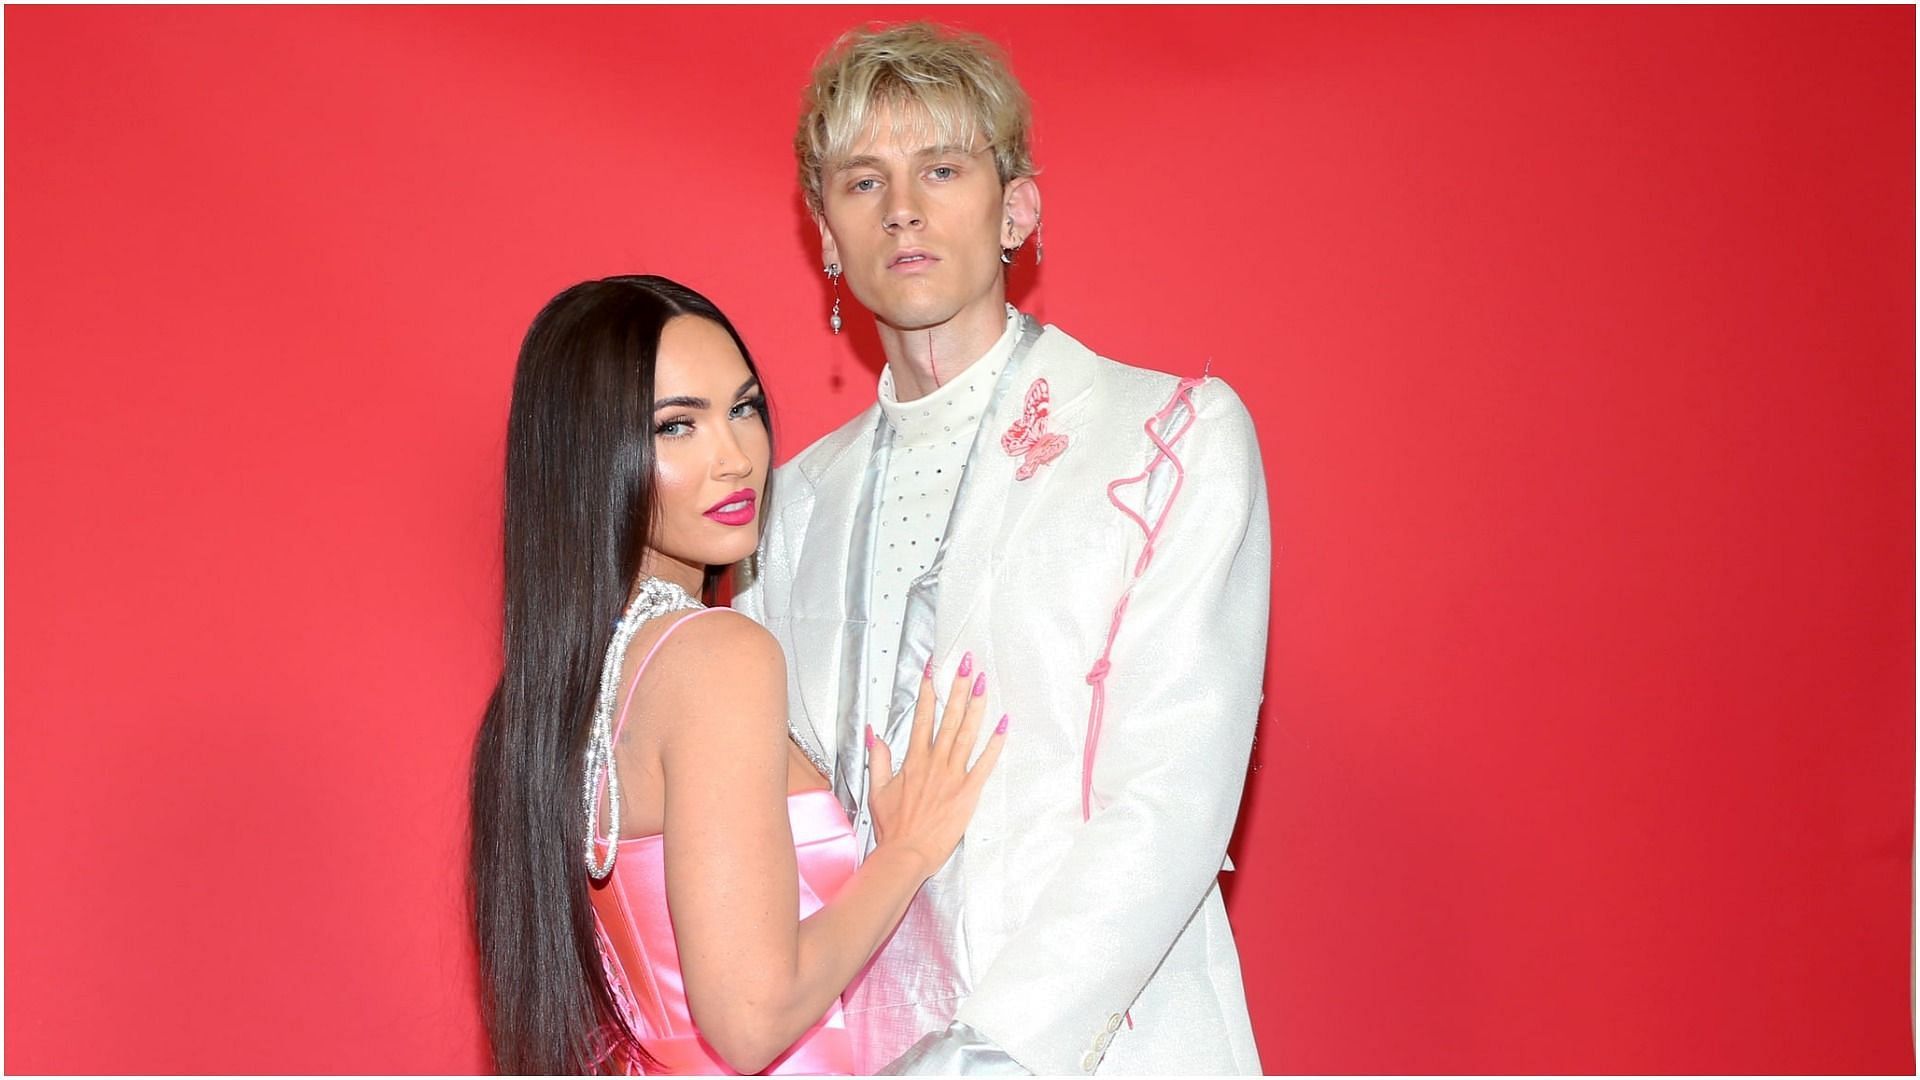 Megan Fox and MGK started dating in July 2020 (Image via Getty Images/Phillip Faraone)